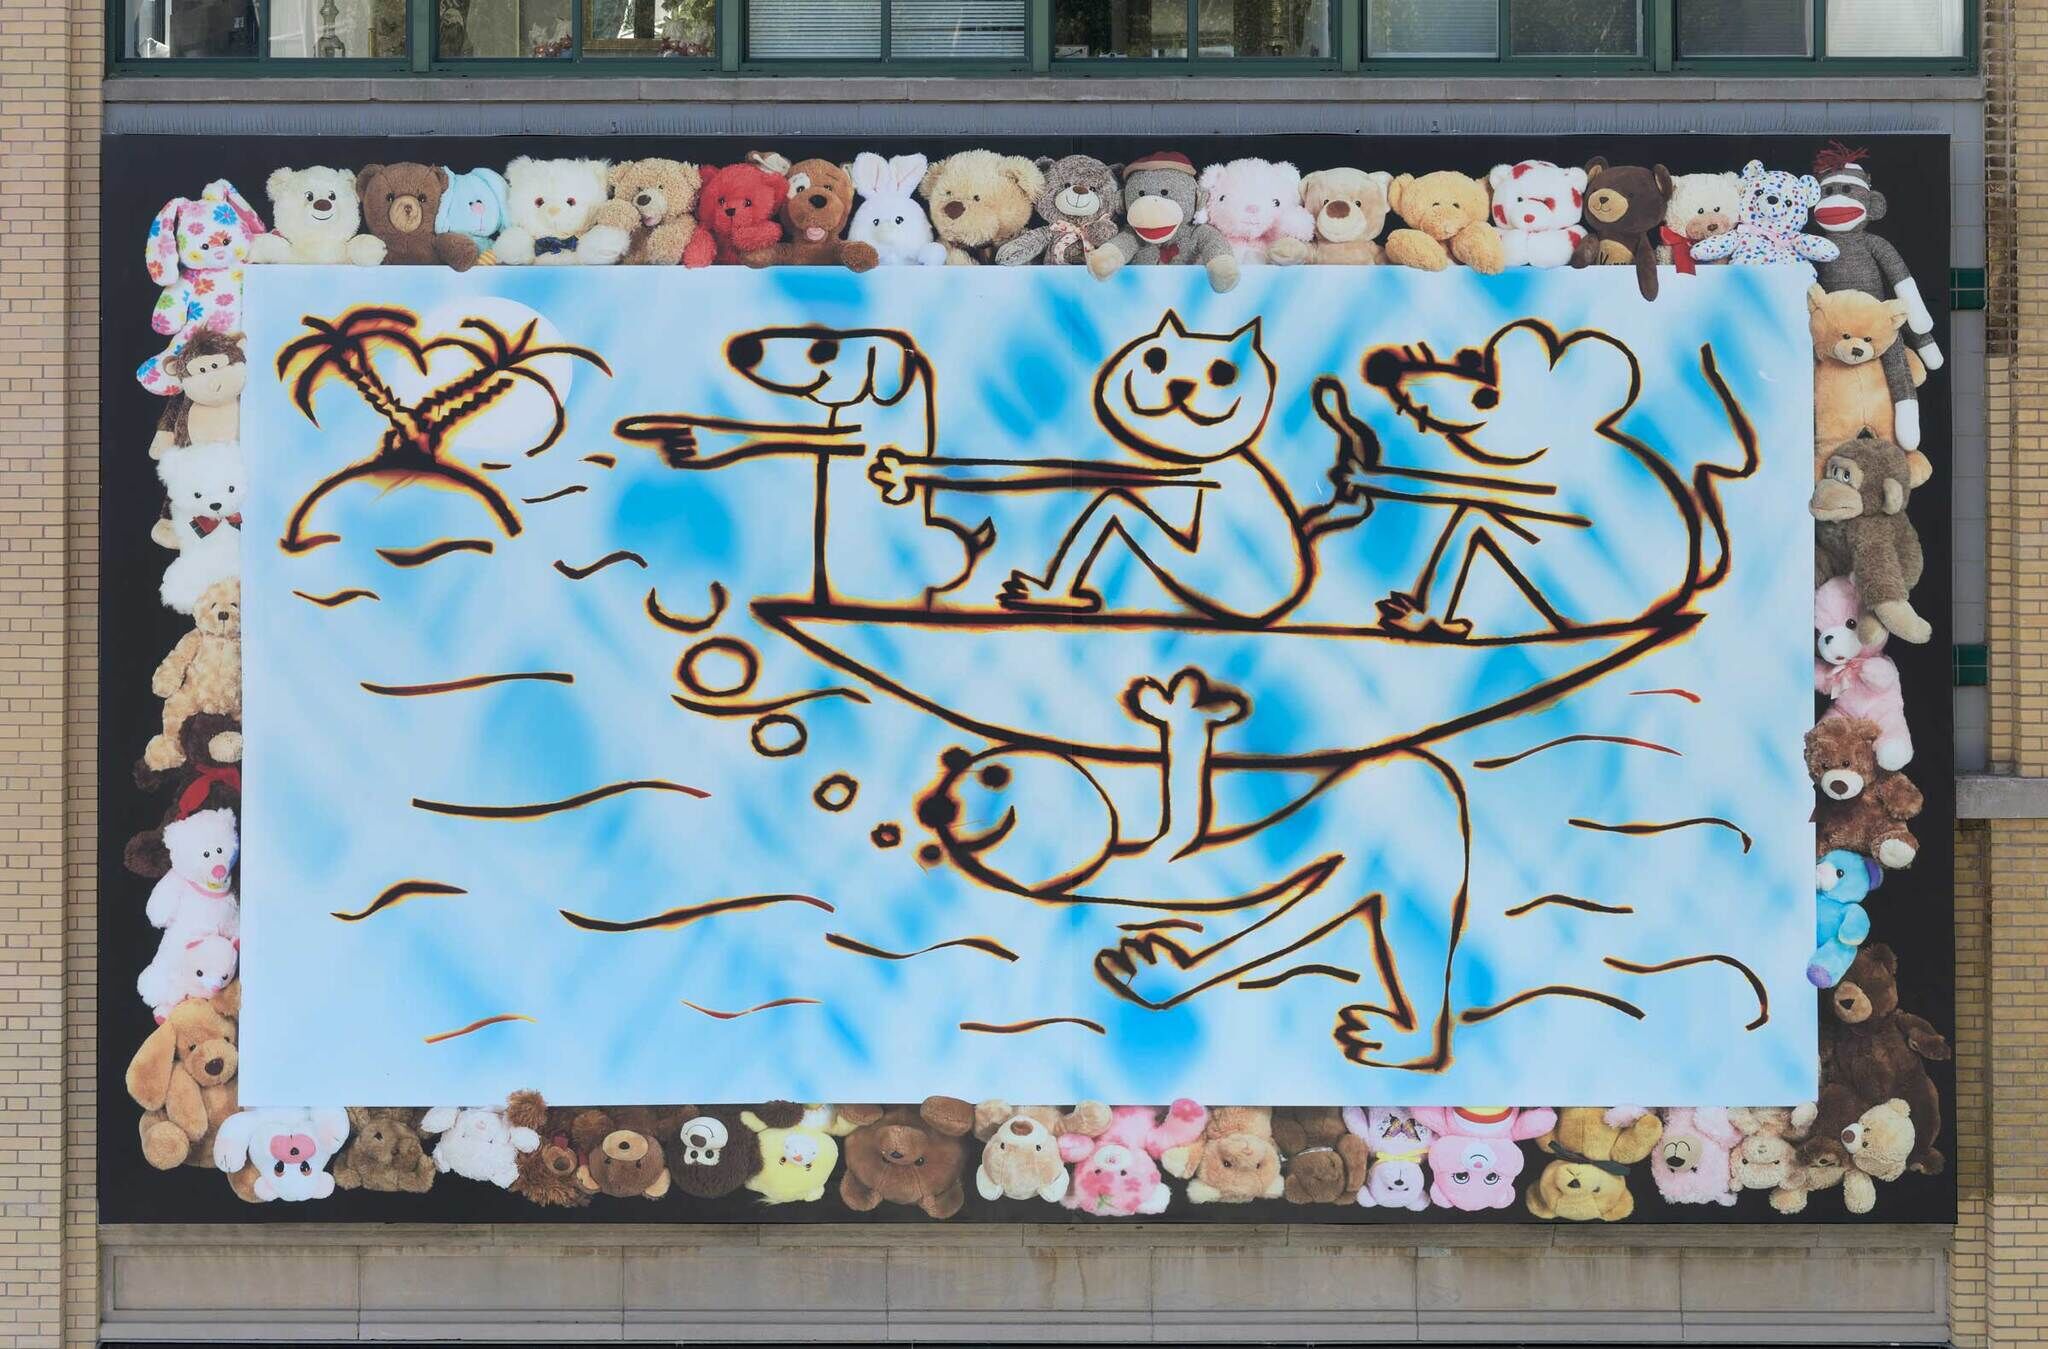 A mural of a cartoon-ish drawing of animals on a boat on a background of stuffed animals.